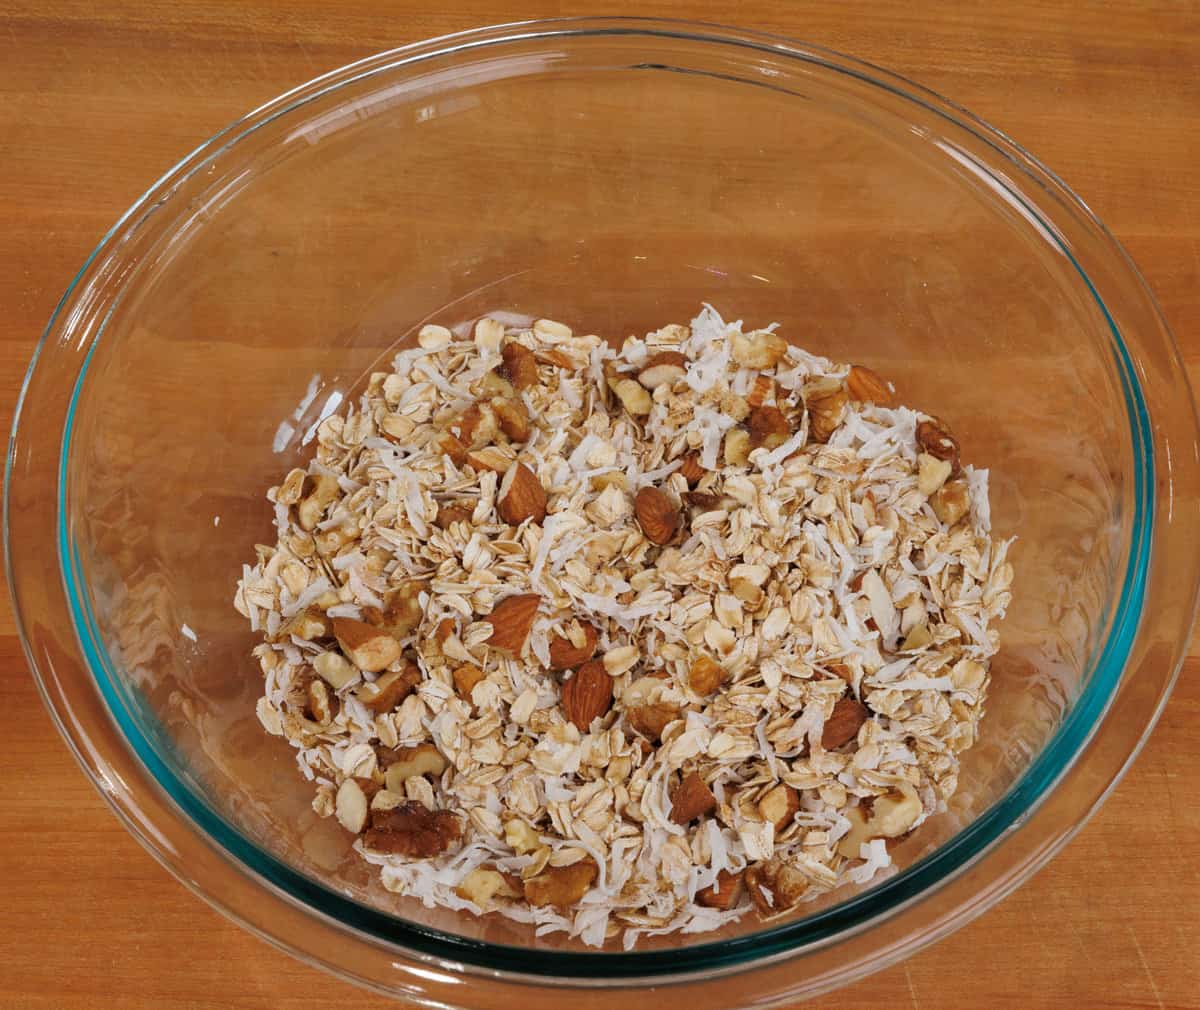 unbaked granola in a large mixing bowl.